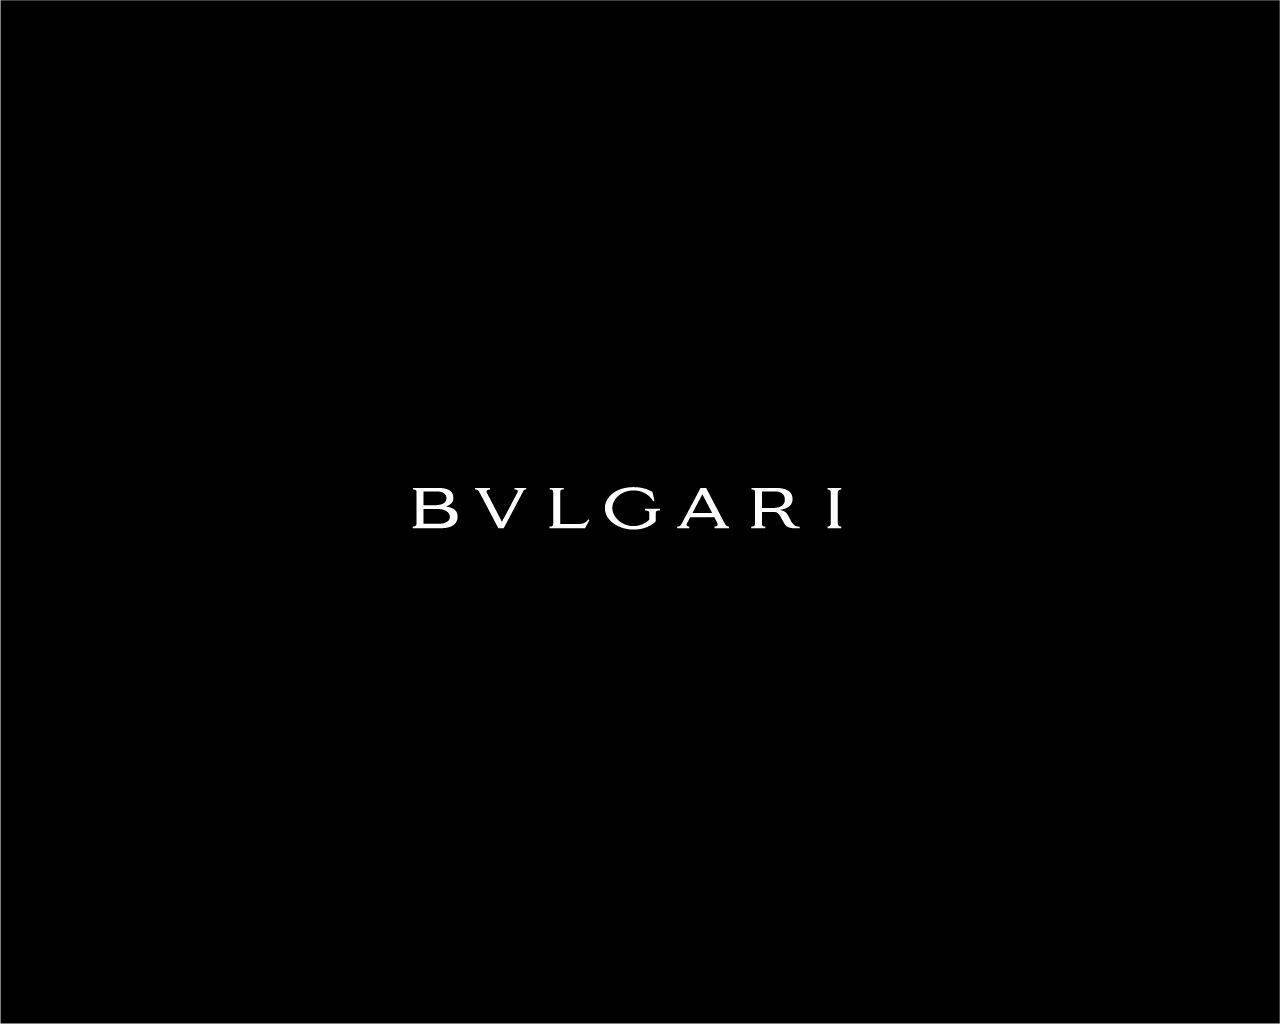 Simplebvlgari Logo In Spanish Could Be Translated As 